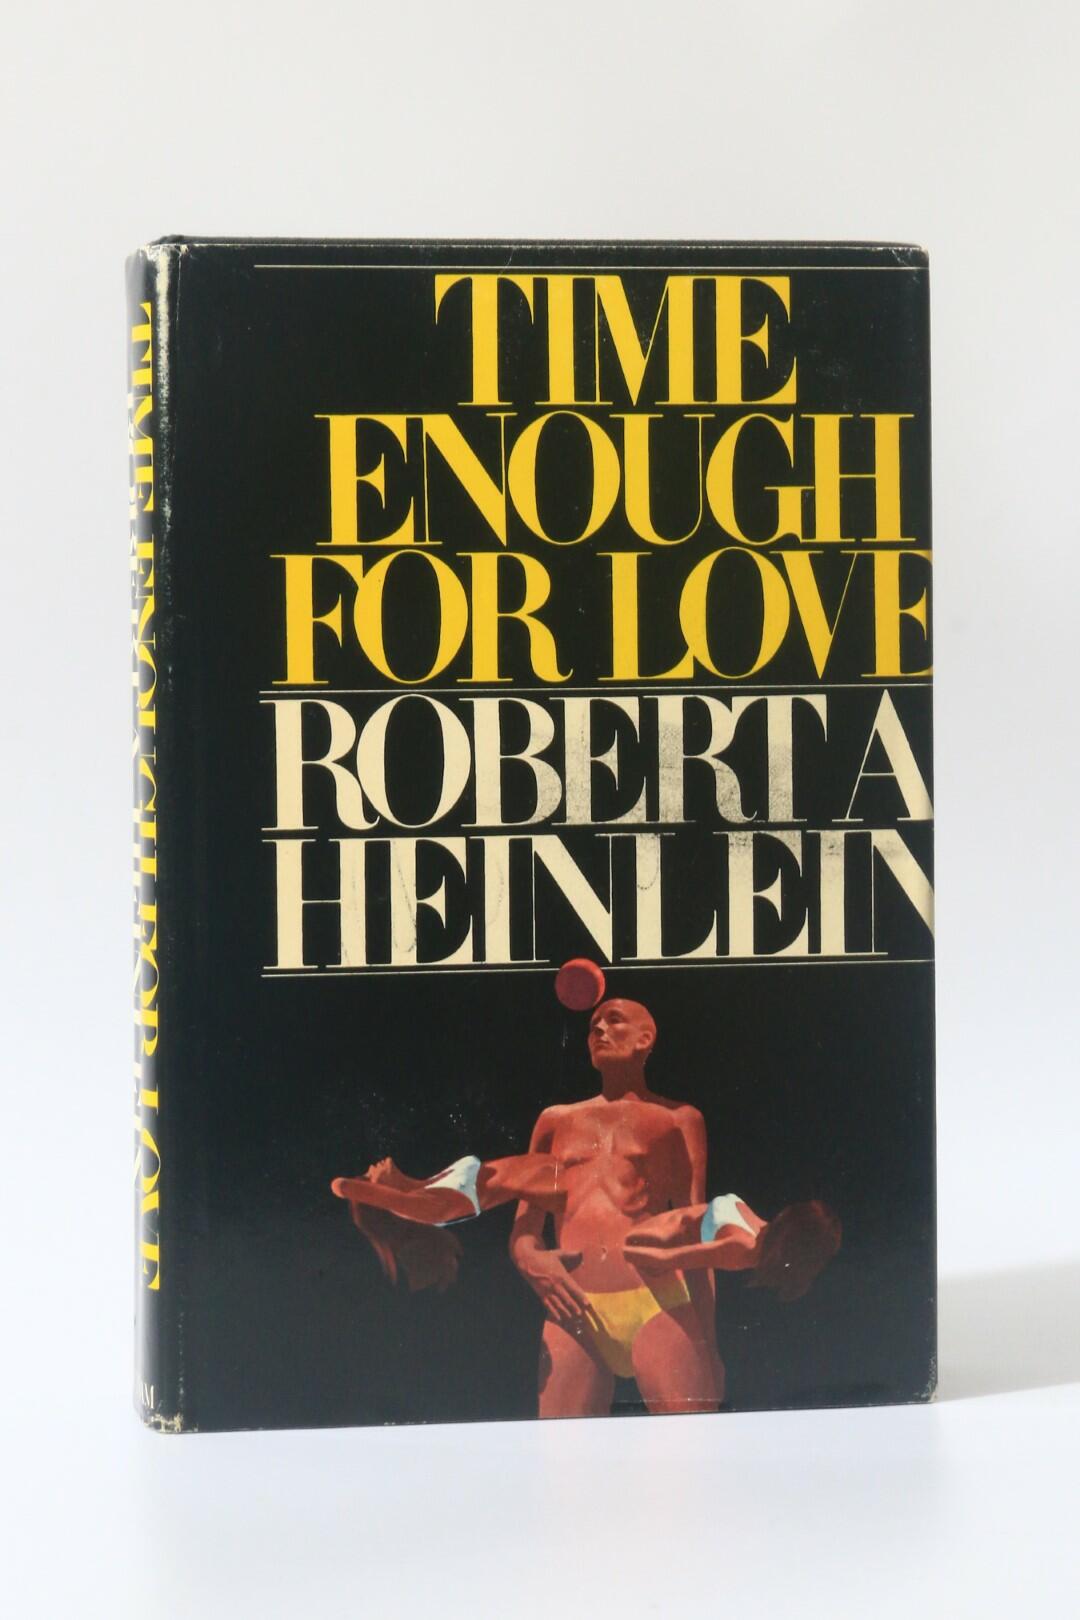 Robert A. Heinlein - Time Enough for Love - G.P. Putnam's, 1973, First Edition.